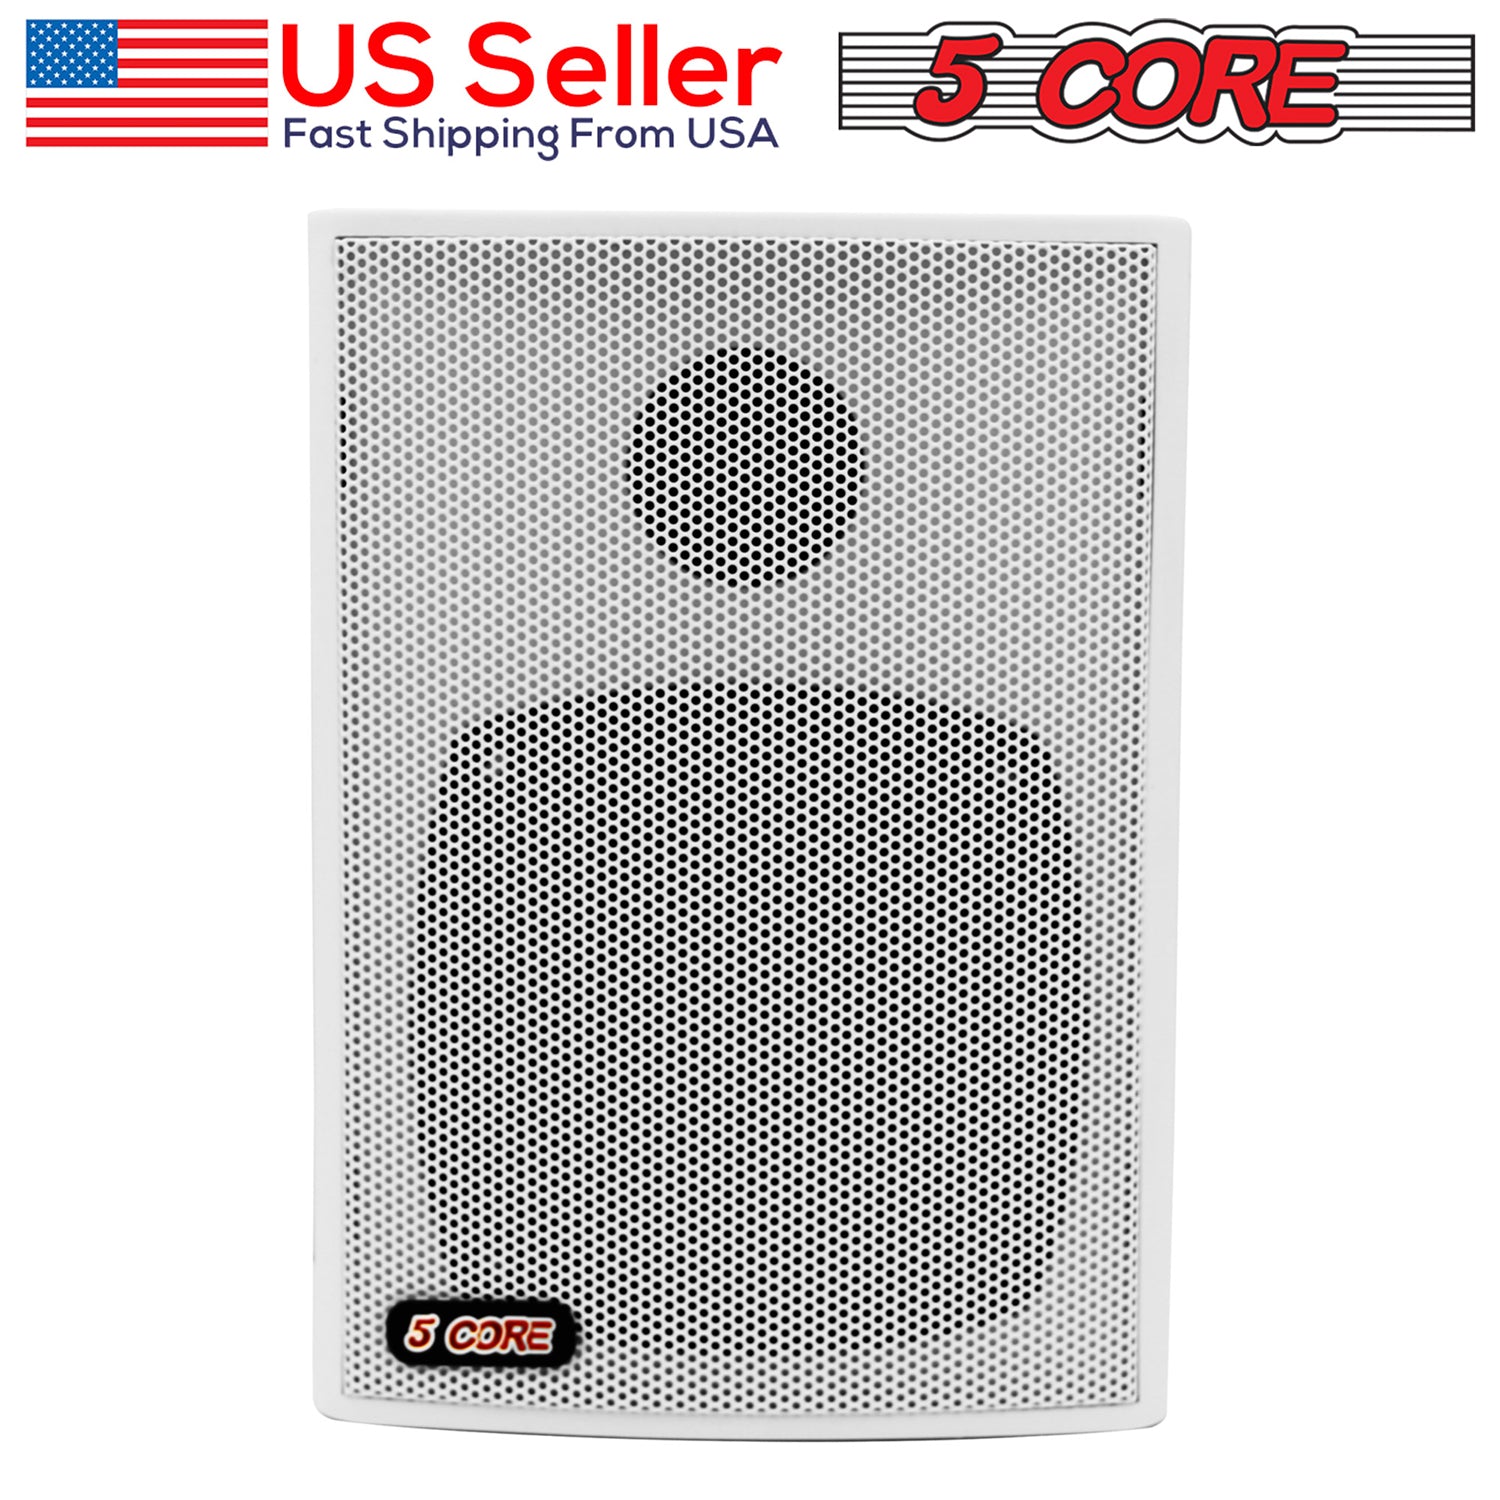 5Core Outdoor Wall Speakers 2Way 20W Ceiling Mount Speaker Heavy Duty ABS Enclosure White